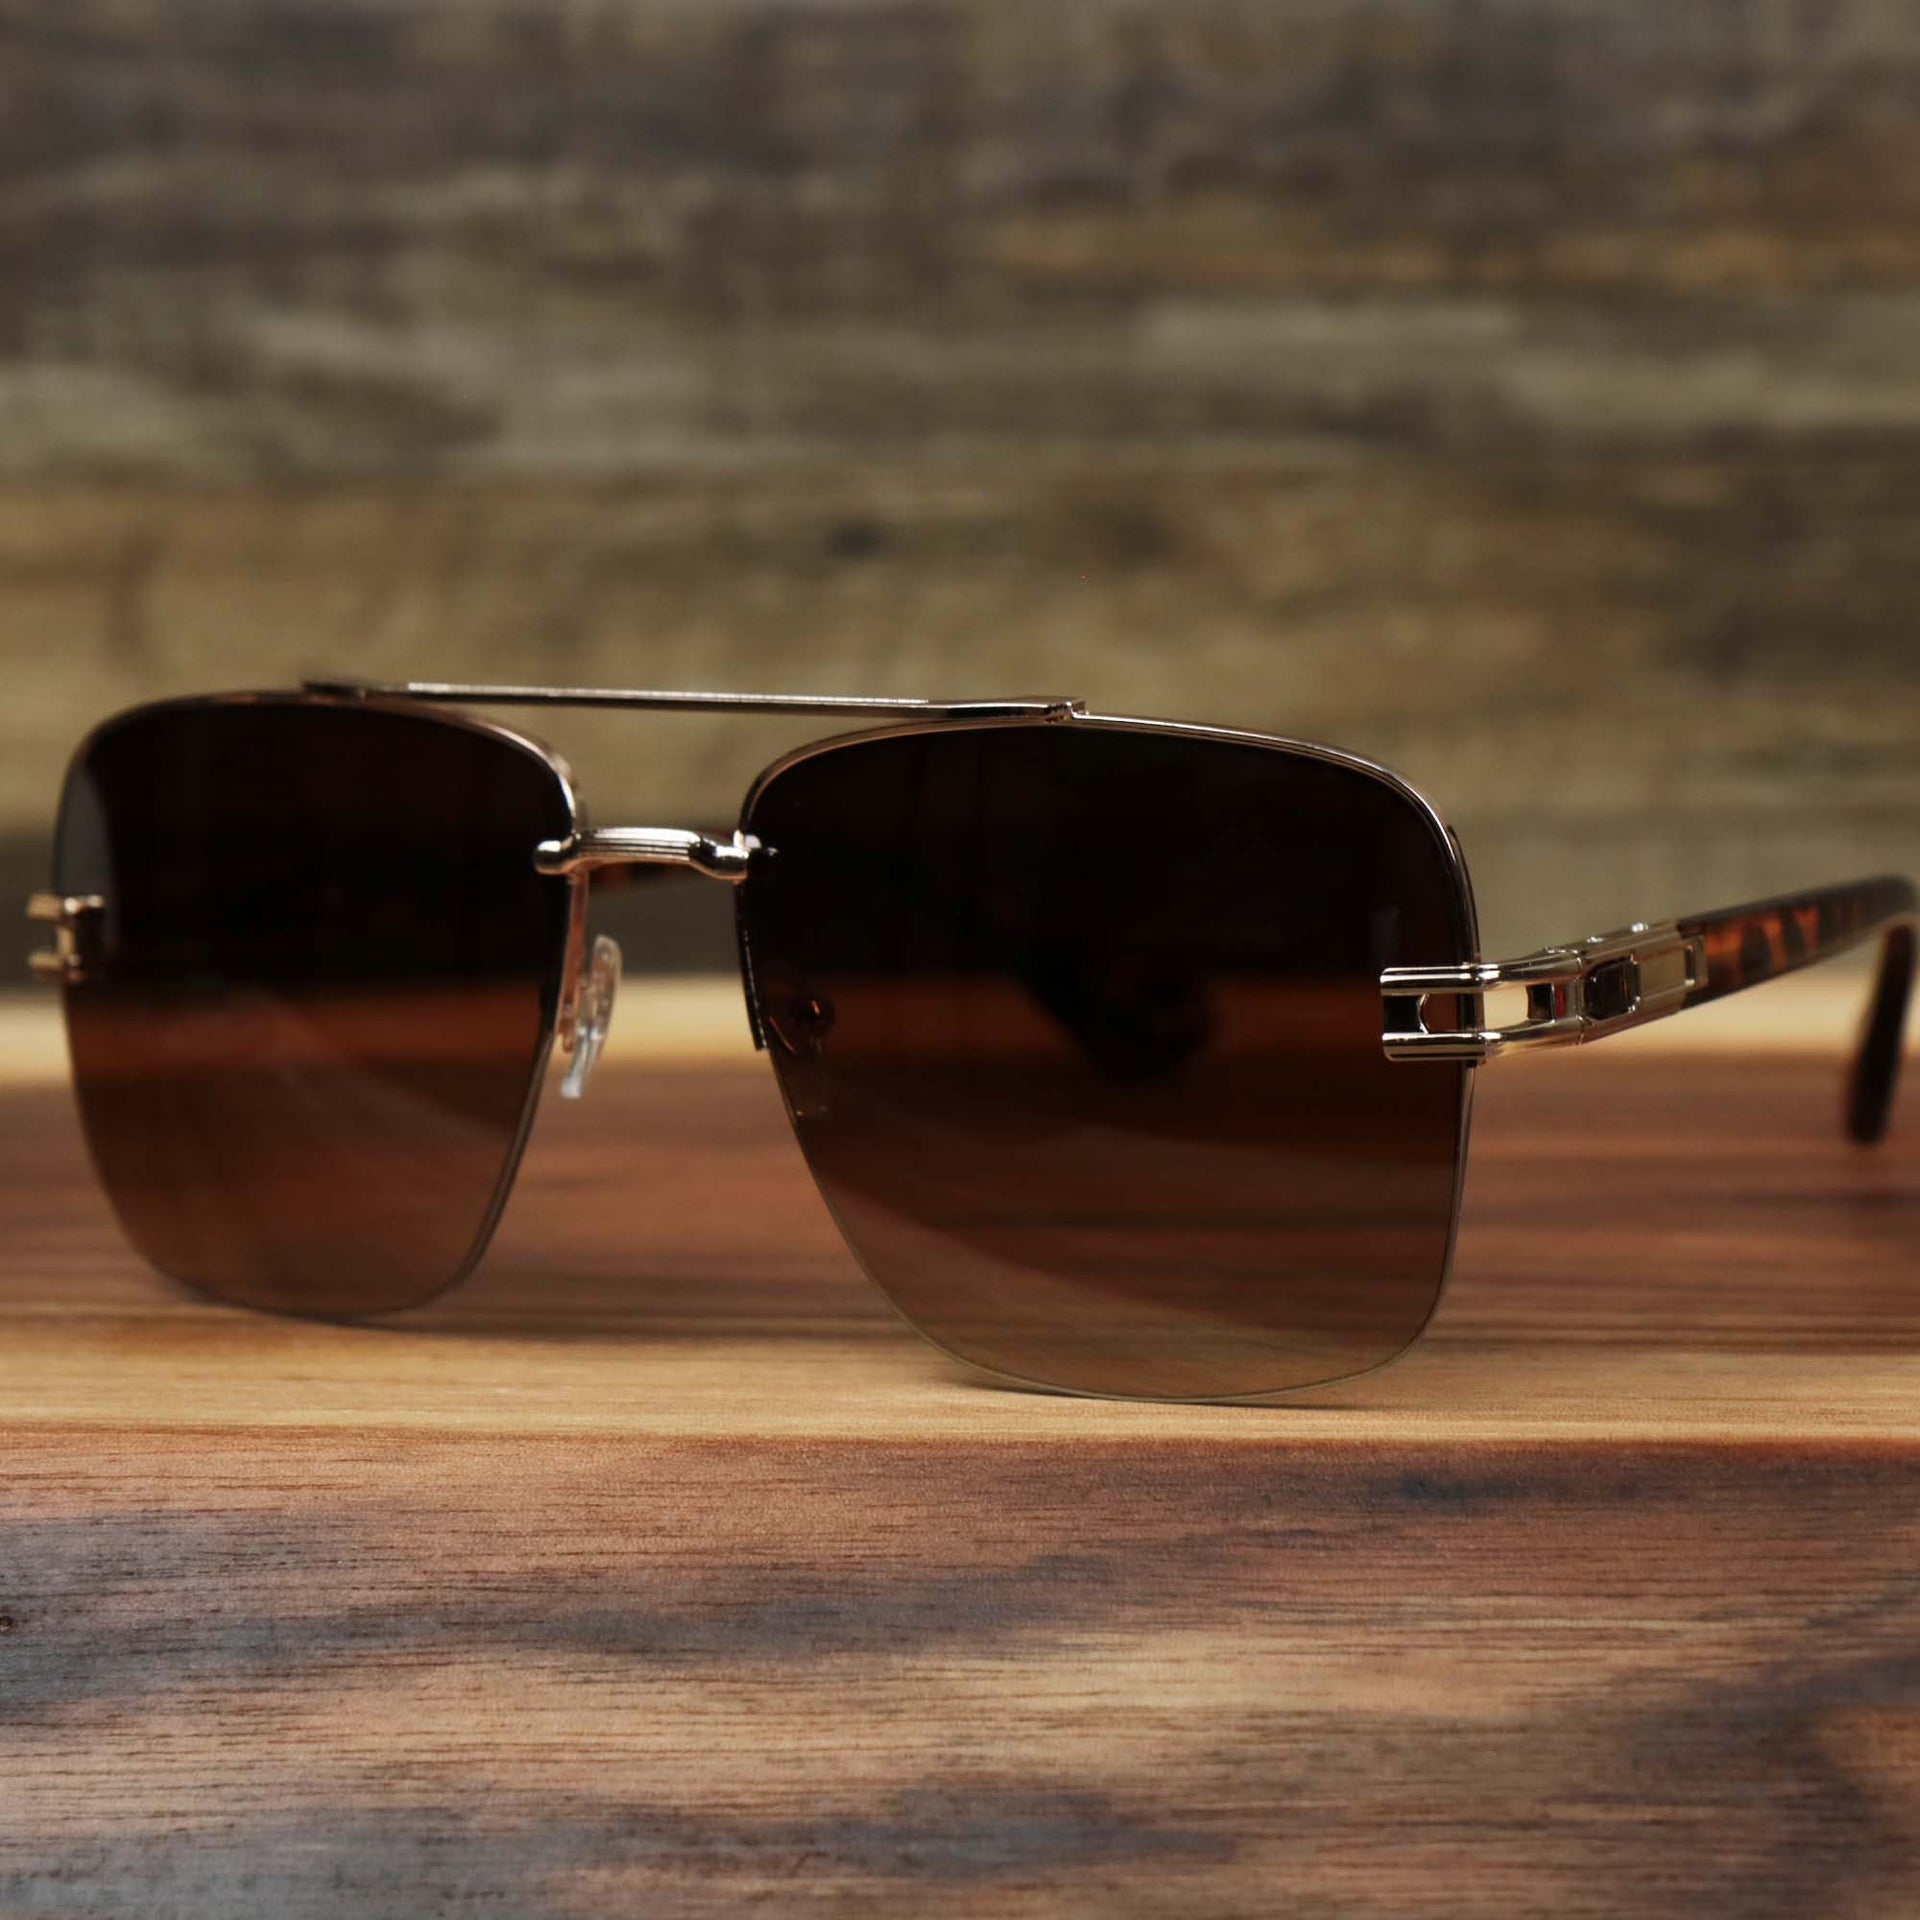 The Round Rectangle Frame Brown Lens Sunglasses with Rose Gold Tortoise Frame